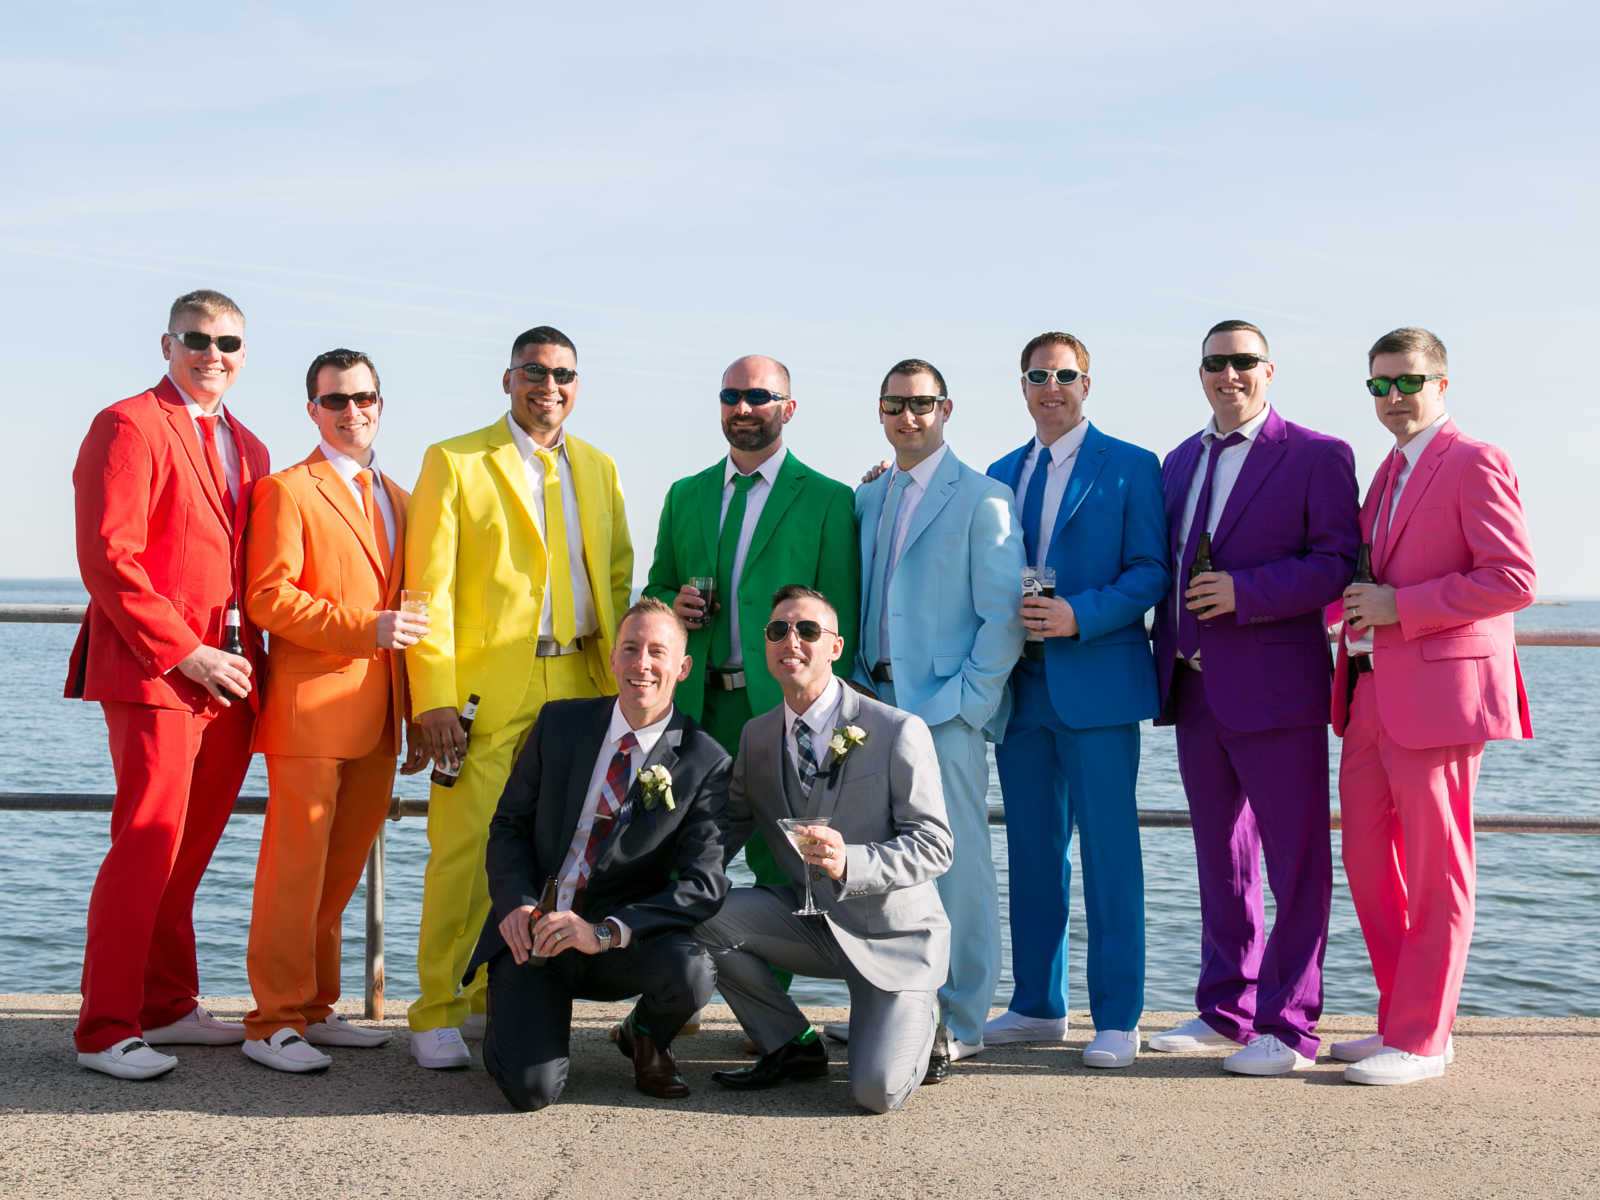 Grooms kneel on pier smiling in front of friends who are lined up in rainbow colored suits